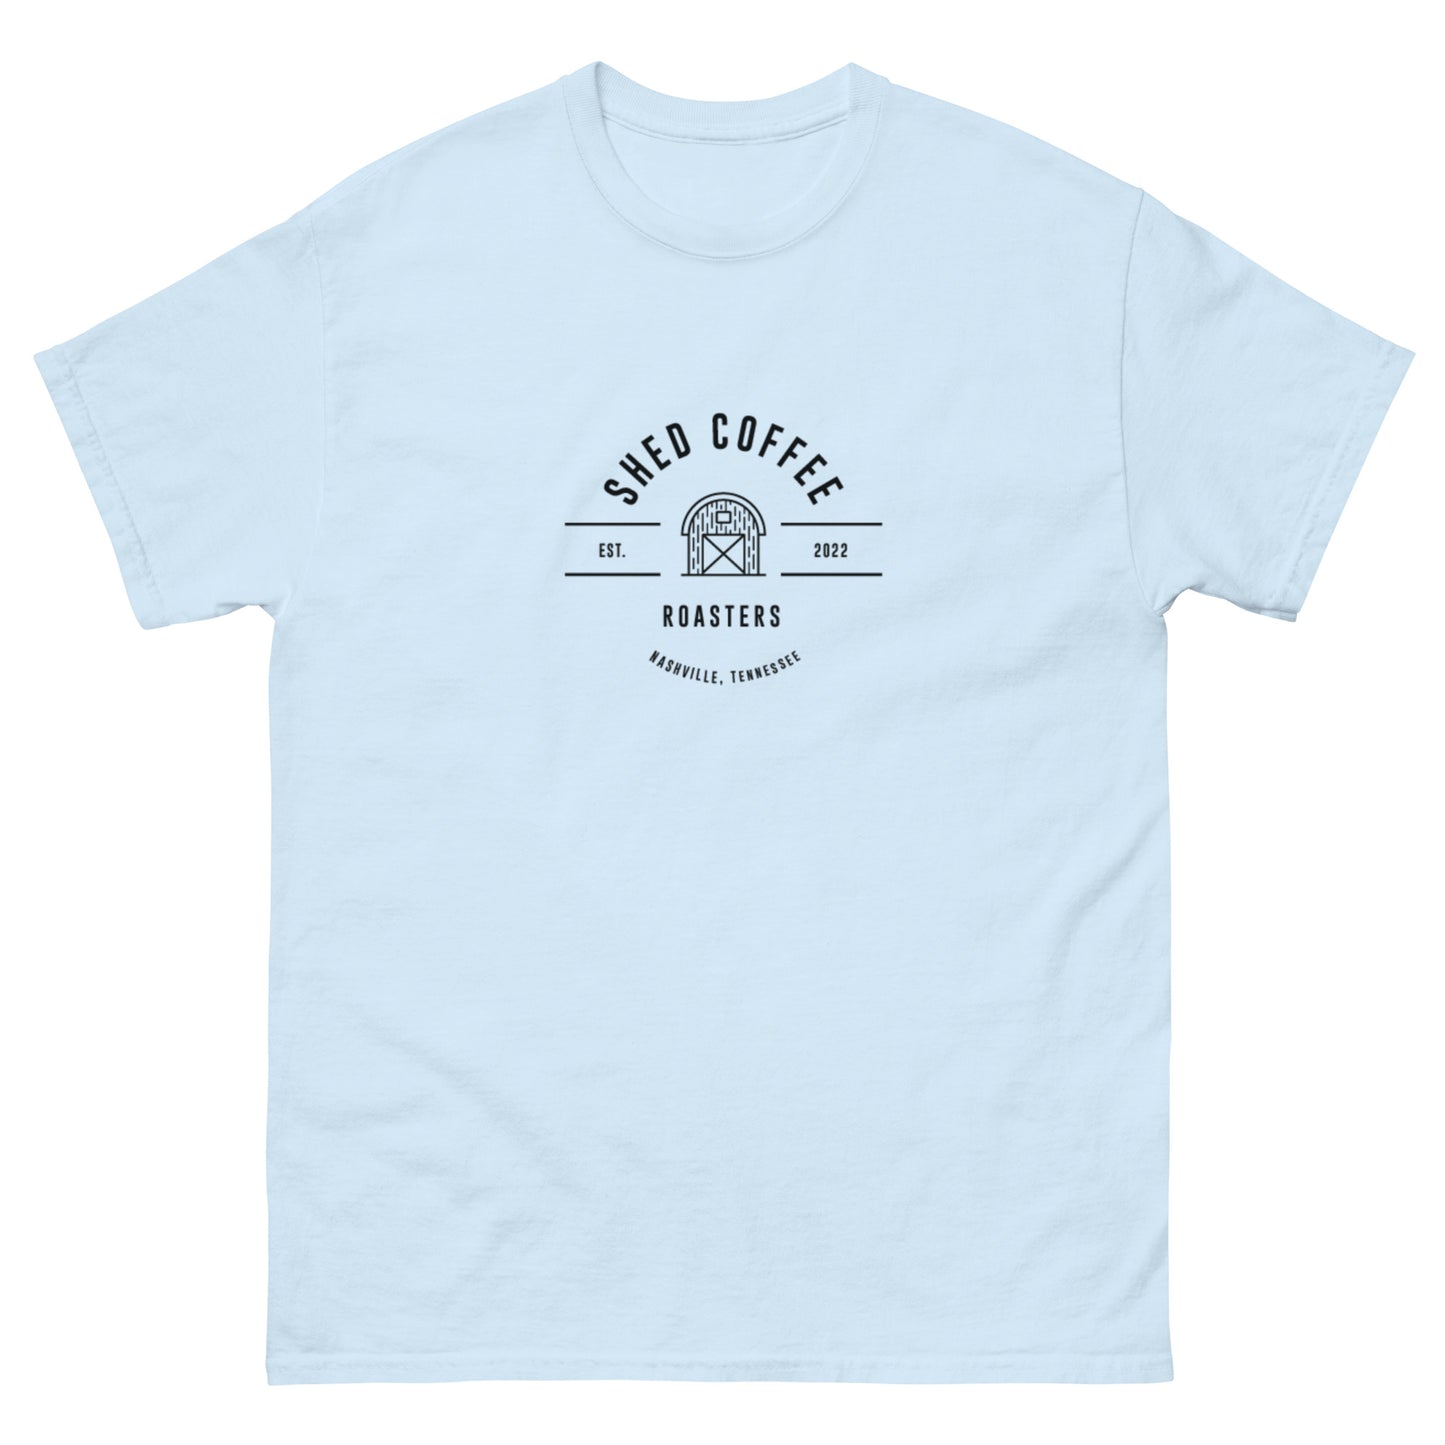 Shed classic tee